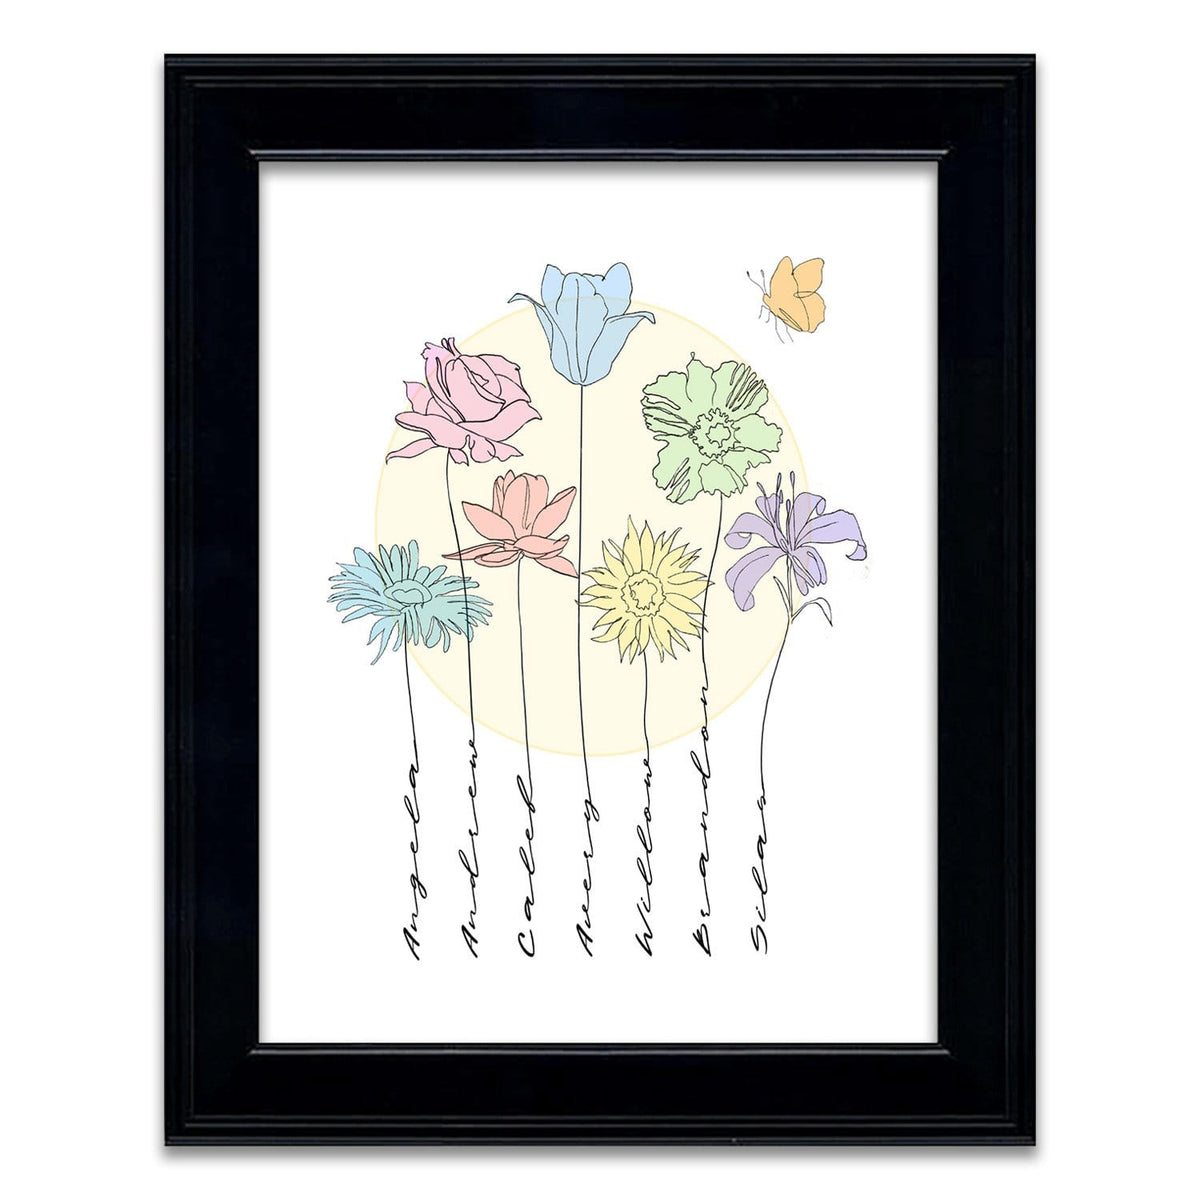 personalized framed flower decor from Personal Prints